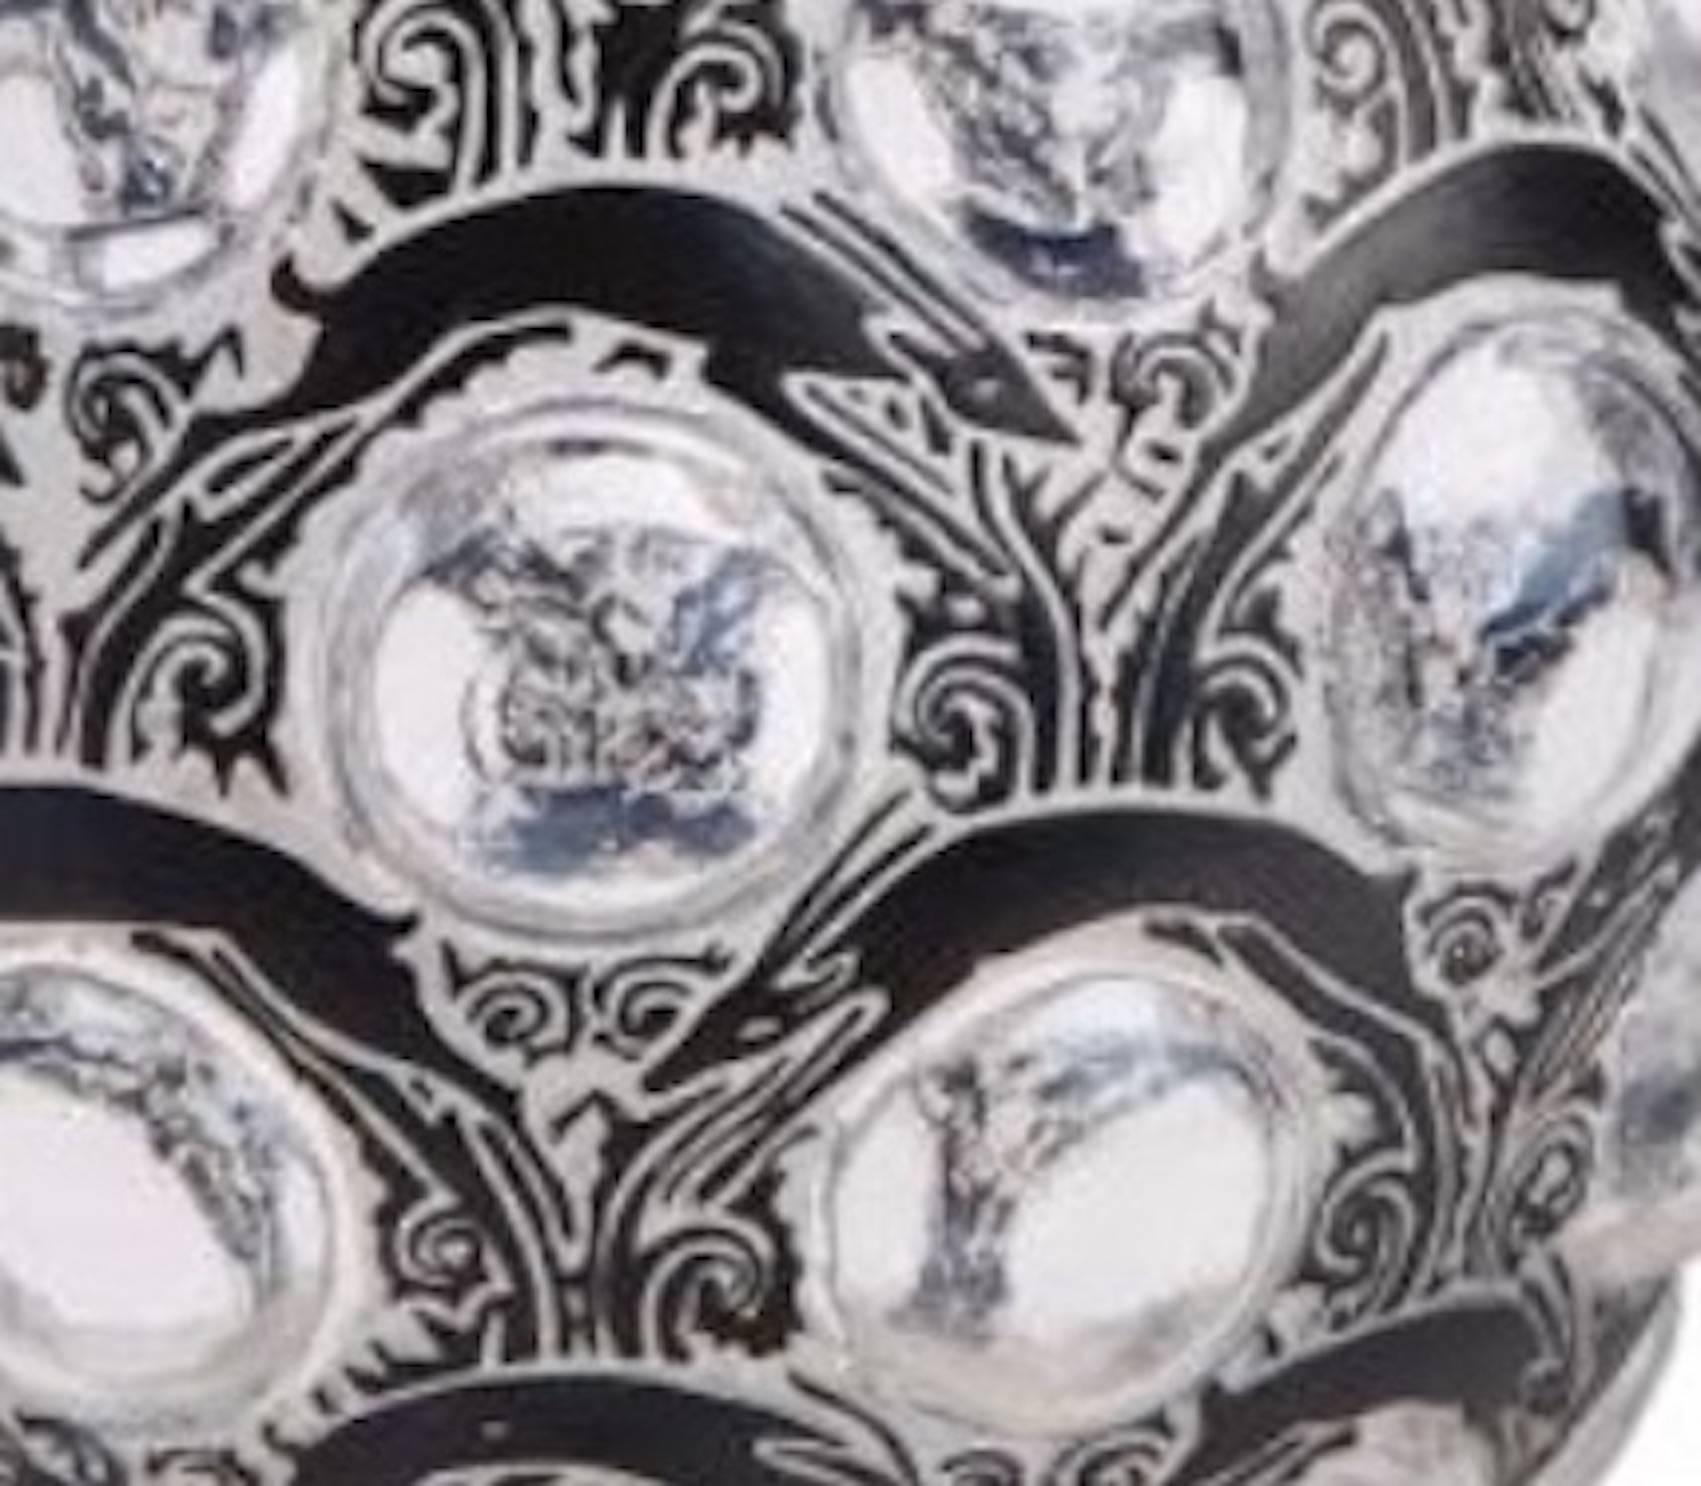 Clear and frosted antilopes motif glass with rows of clear cabochons rosted and black enameled antelopes motif glass; bulbous frosted and black enameled antilopes motif glass running around rows of clear cabochons and under an undecorated neck and